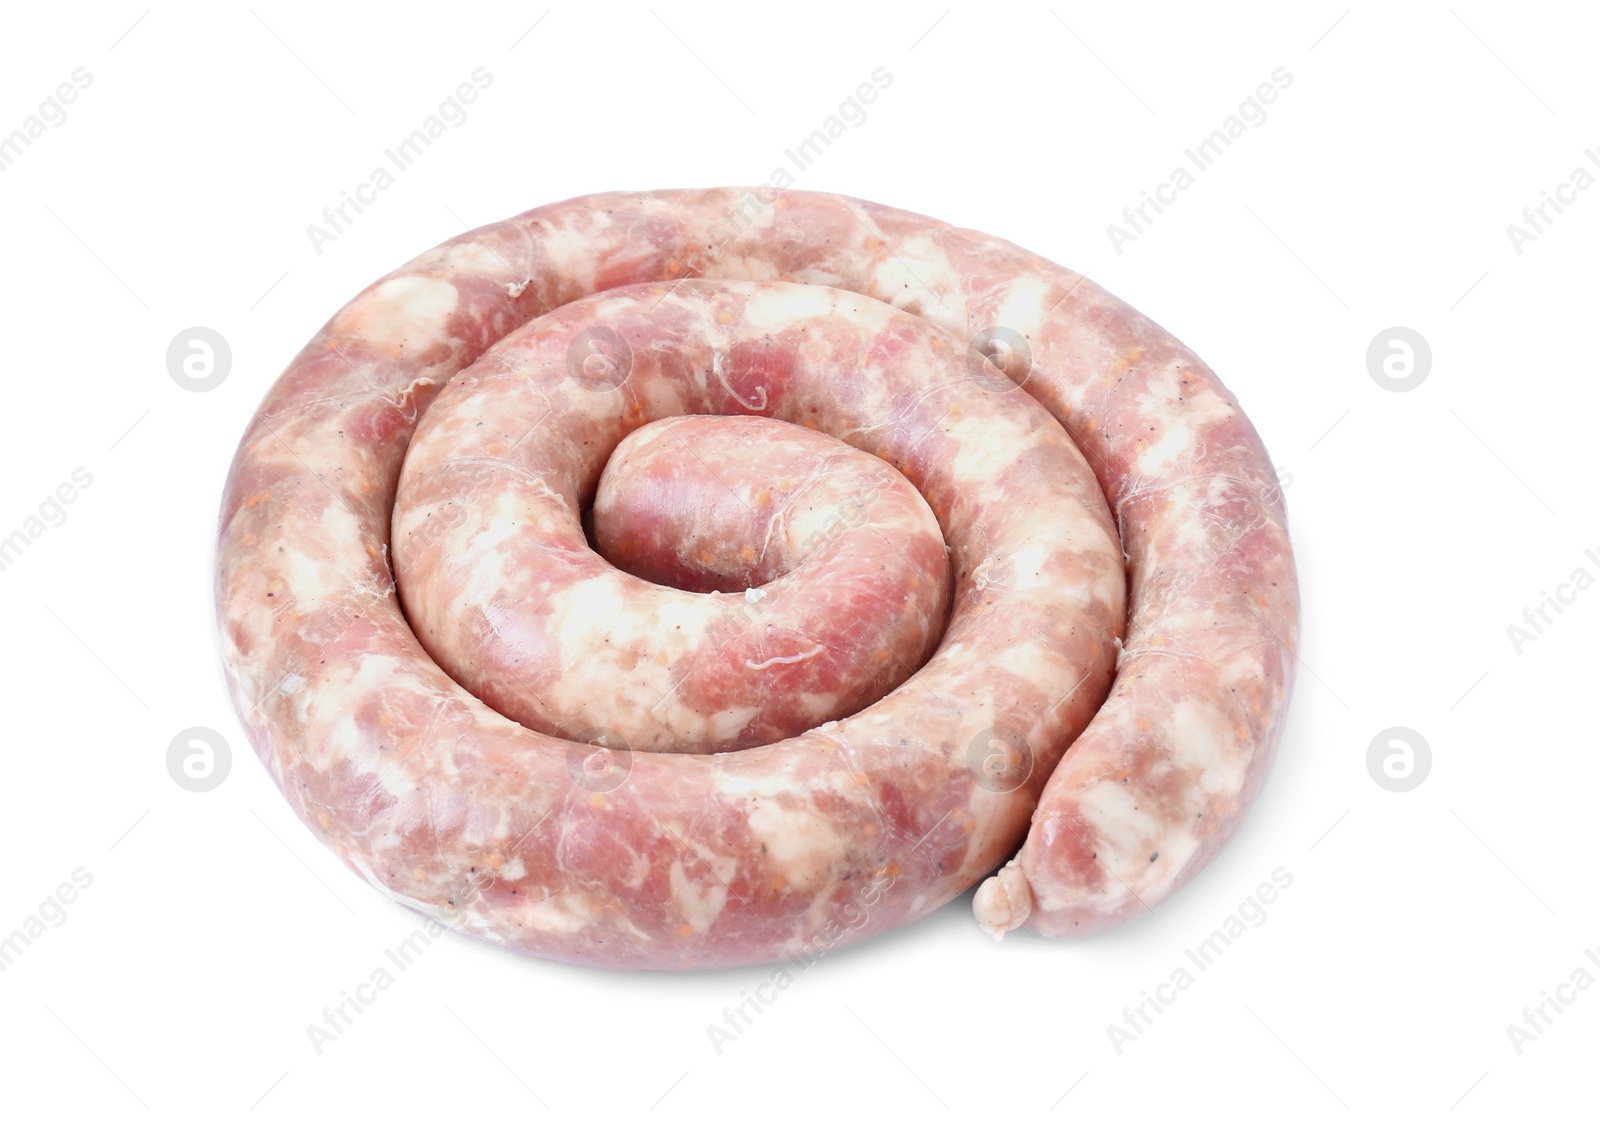 Photo of One raw homemade sausage isolated on white